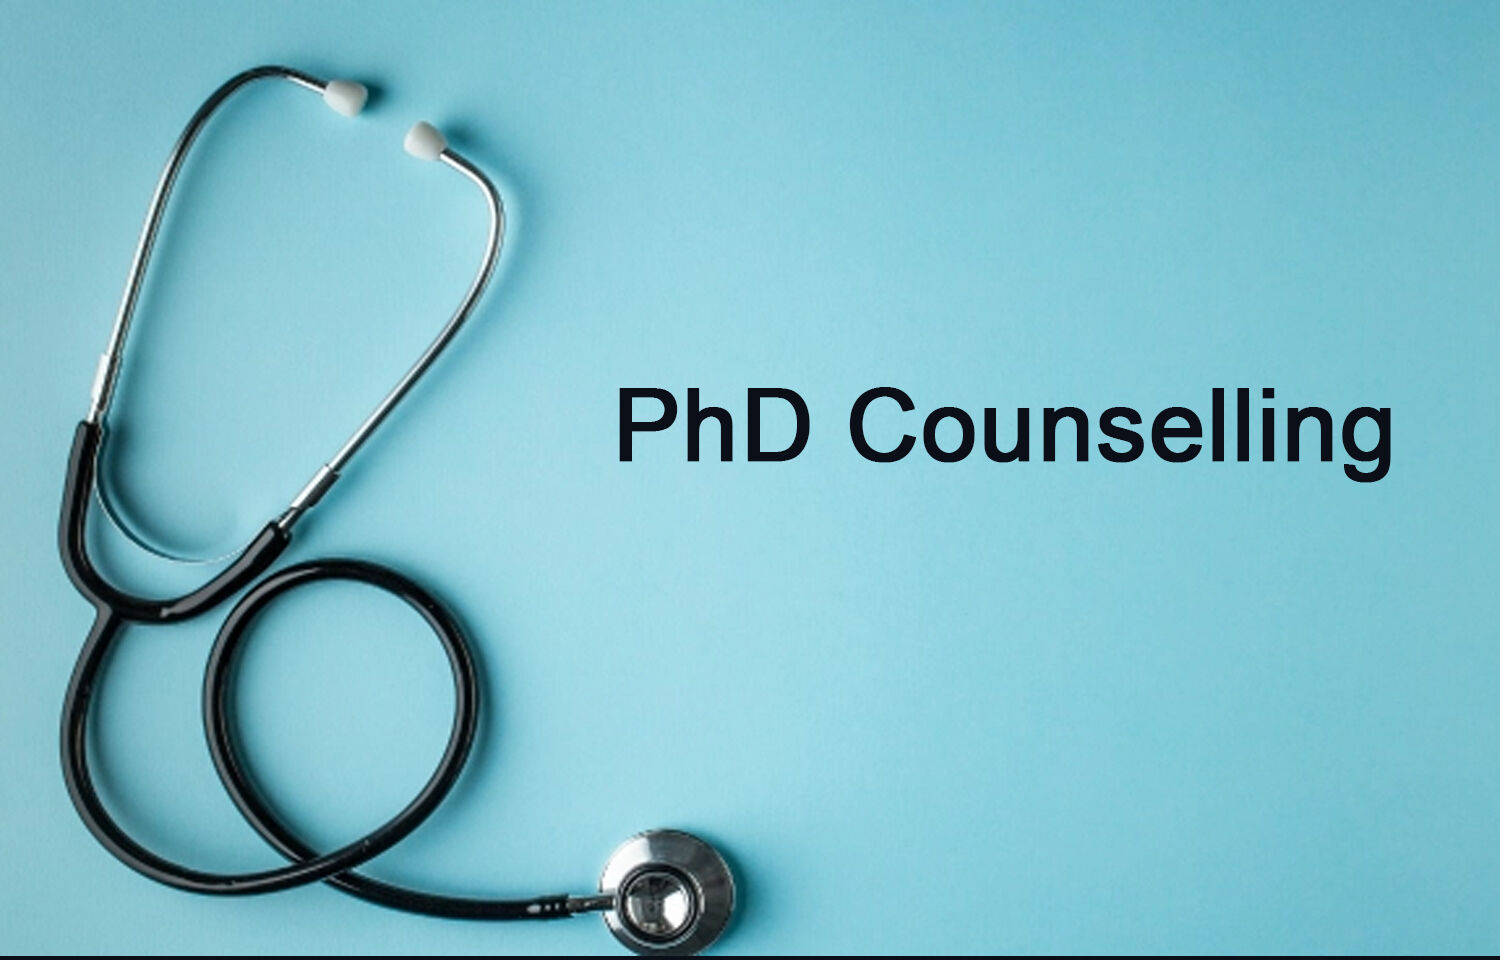 phd in counselling uk